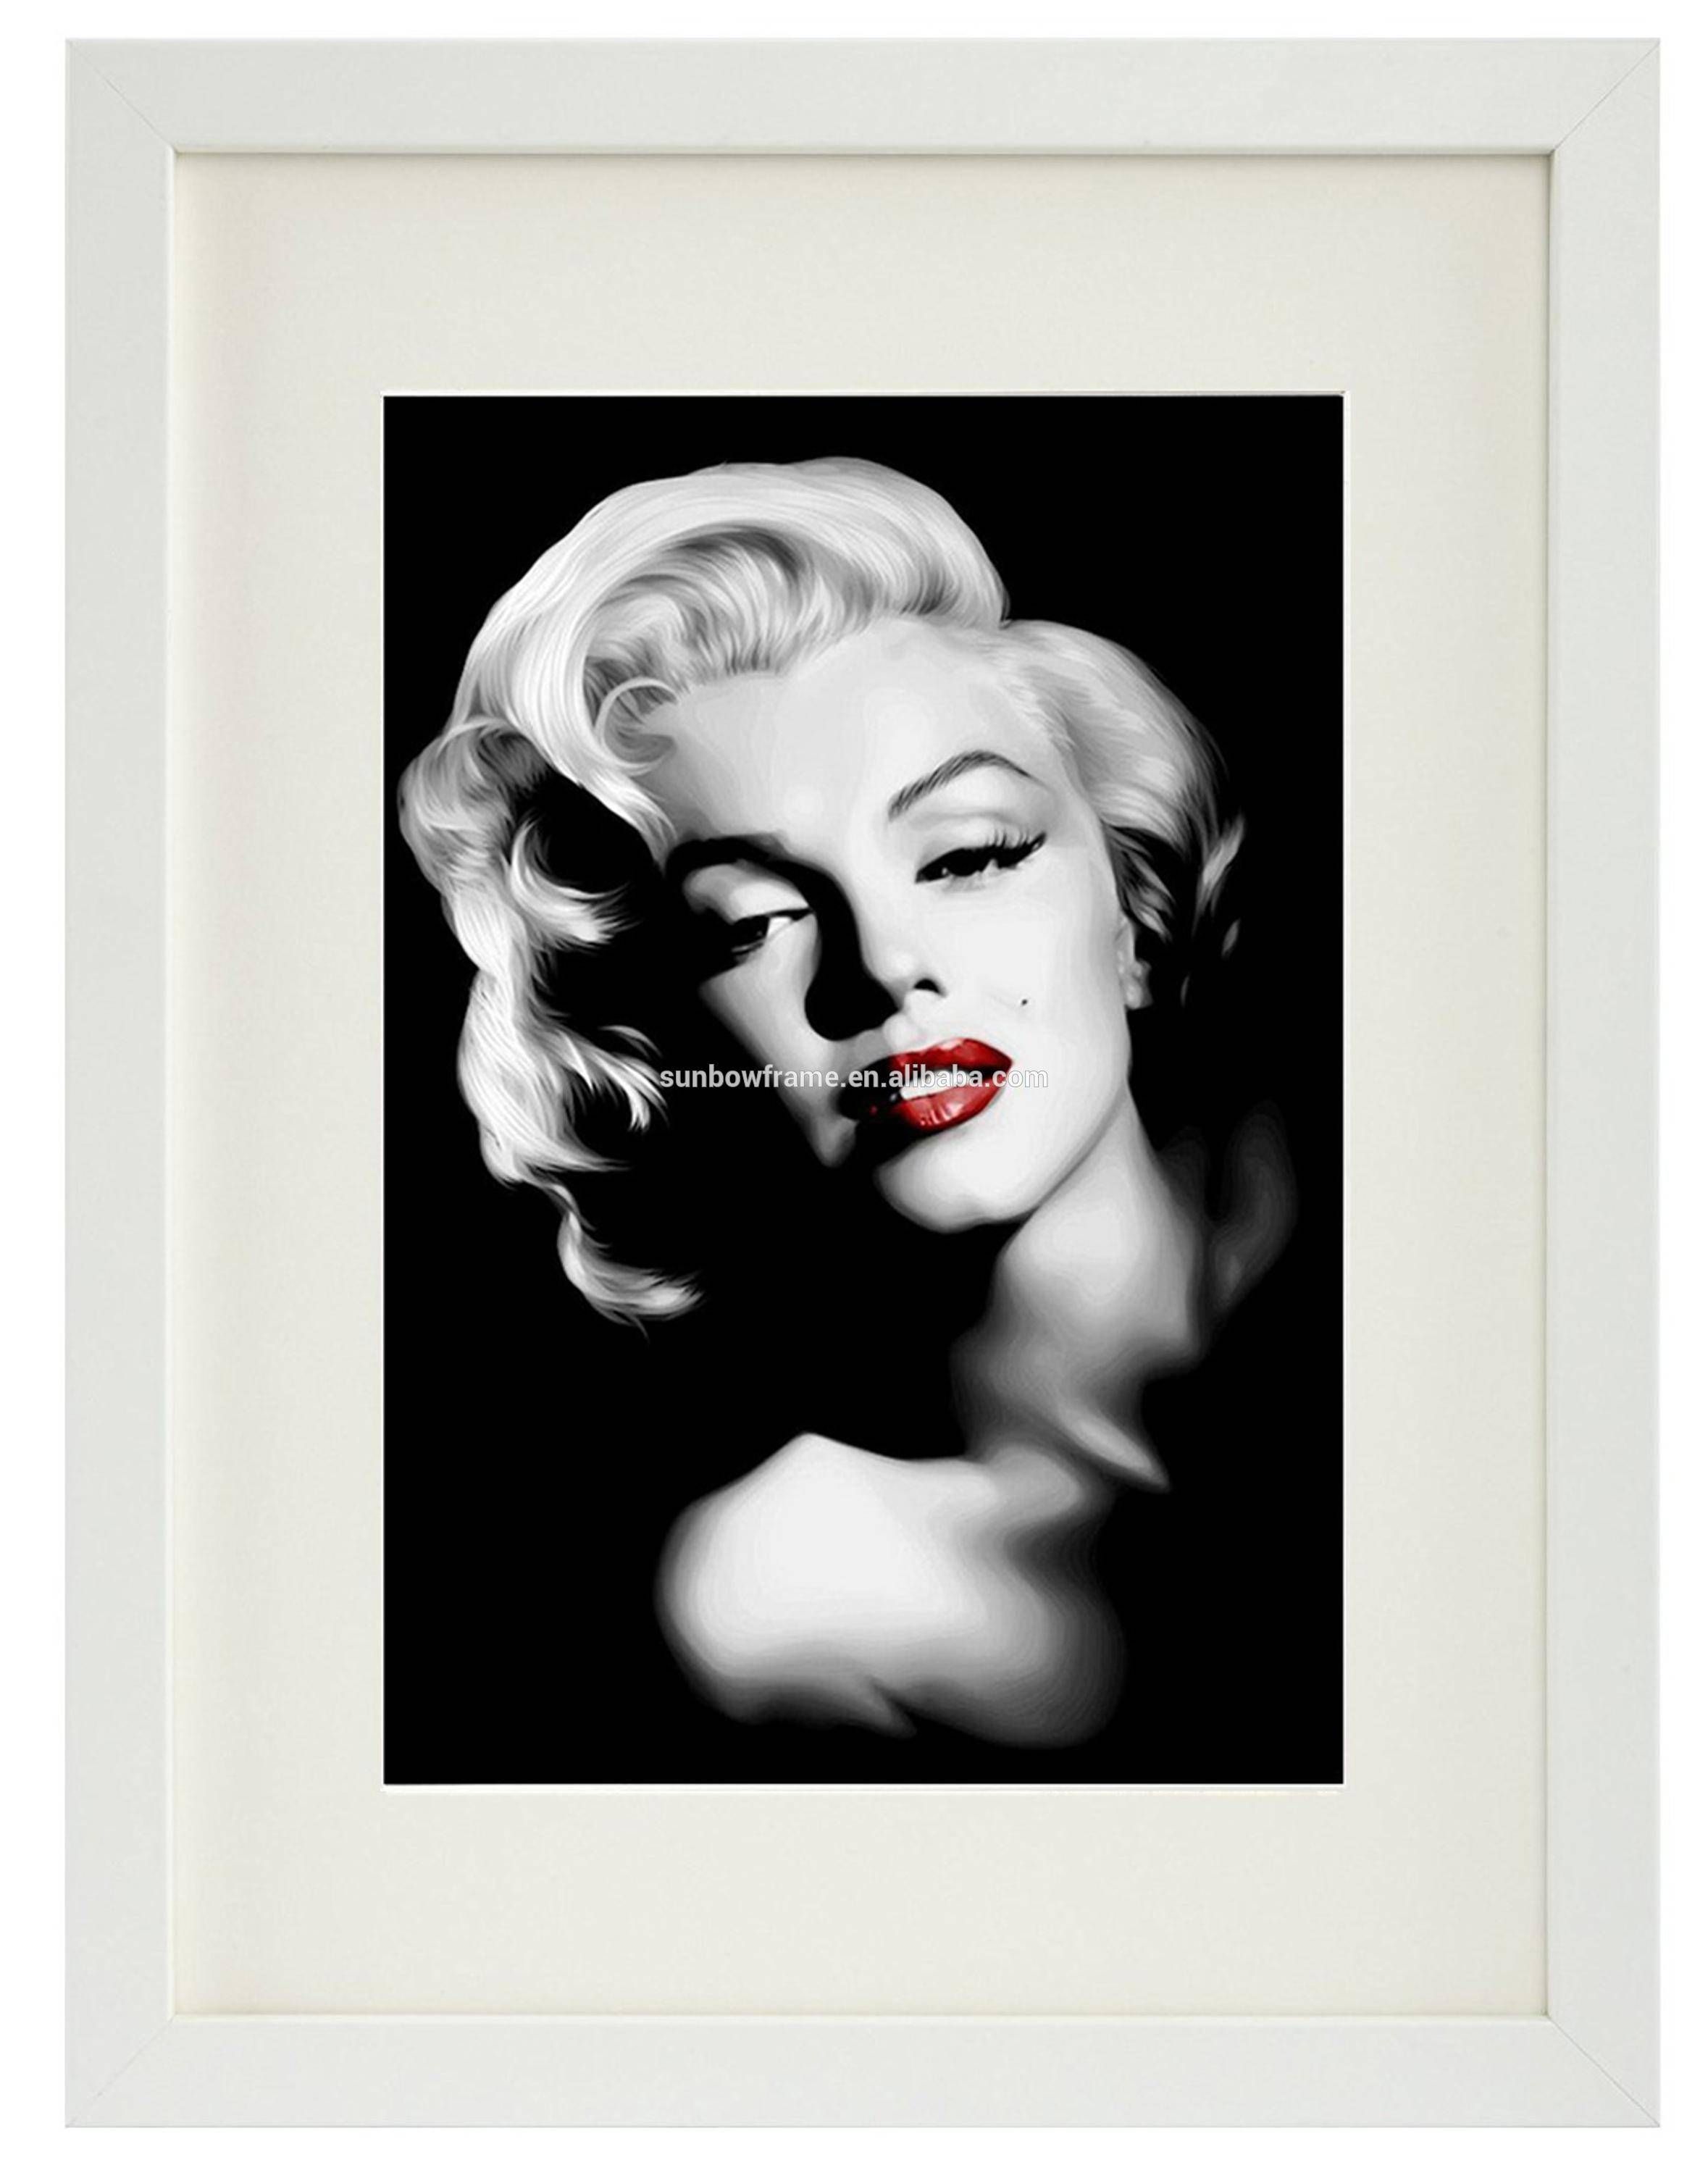 Sexy Marilyn Monroe Wall Art Decor Picture Frame Black White 8x10 For Most Popular Marilyn Monroe Wall Art (View 9 of 25)